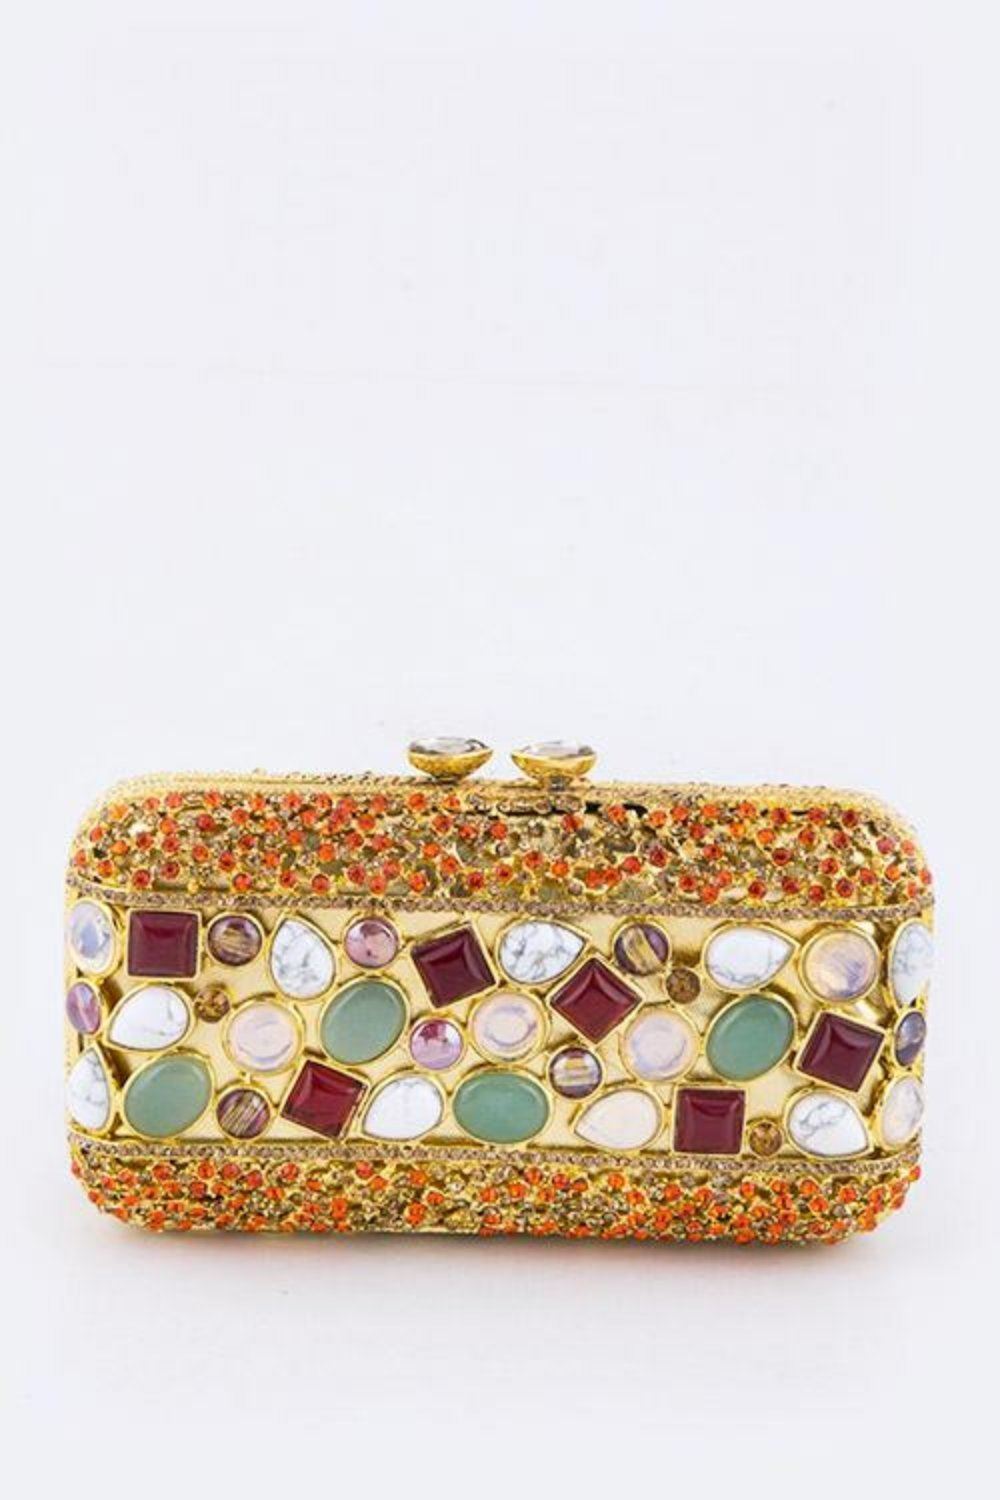 Primary image for Bejeweled Austrian Crystal Statement Box Clutch